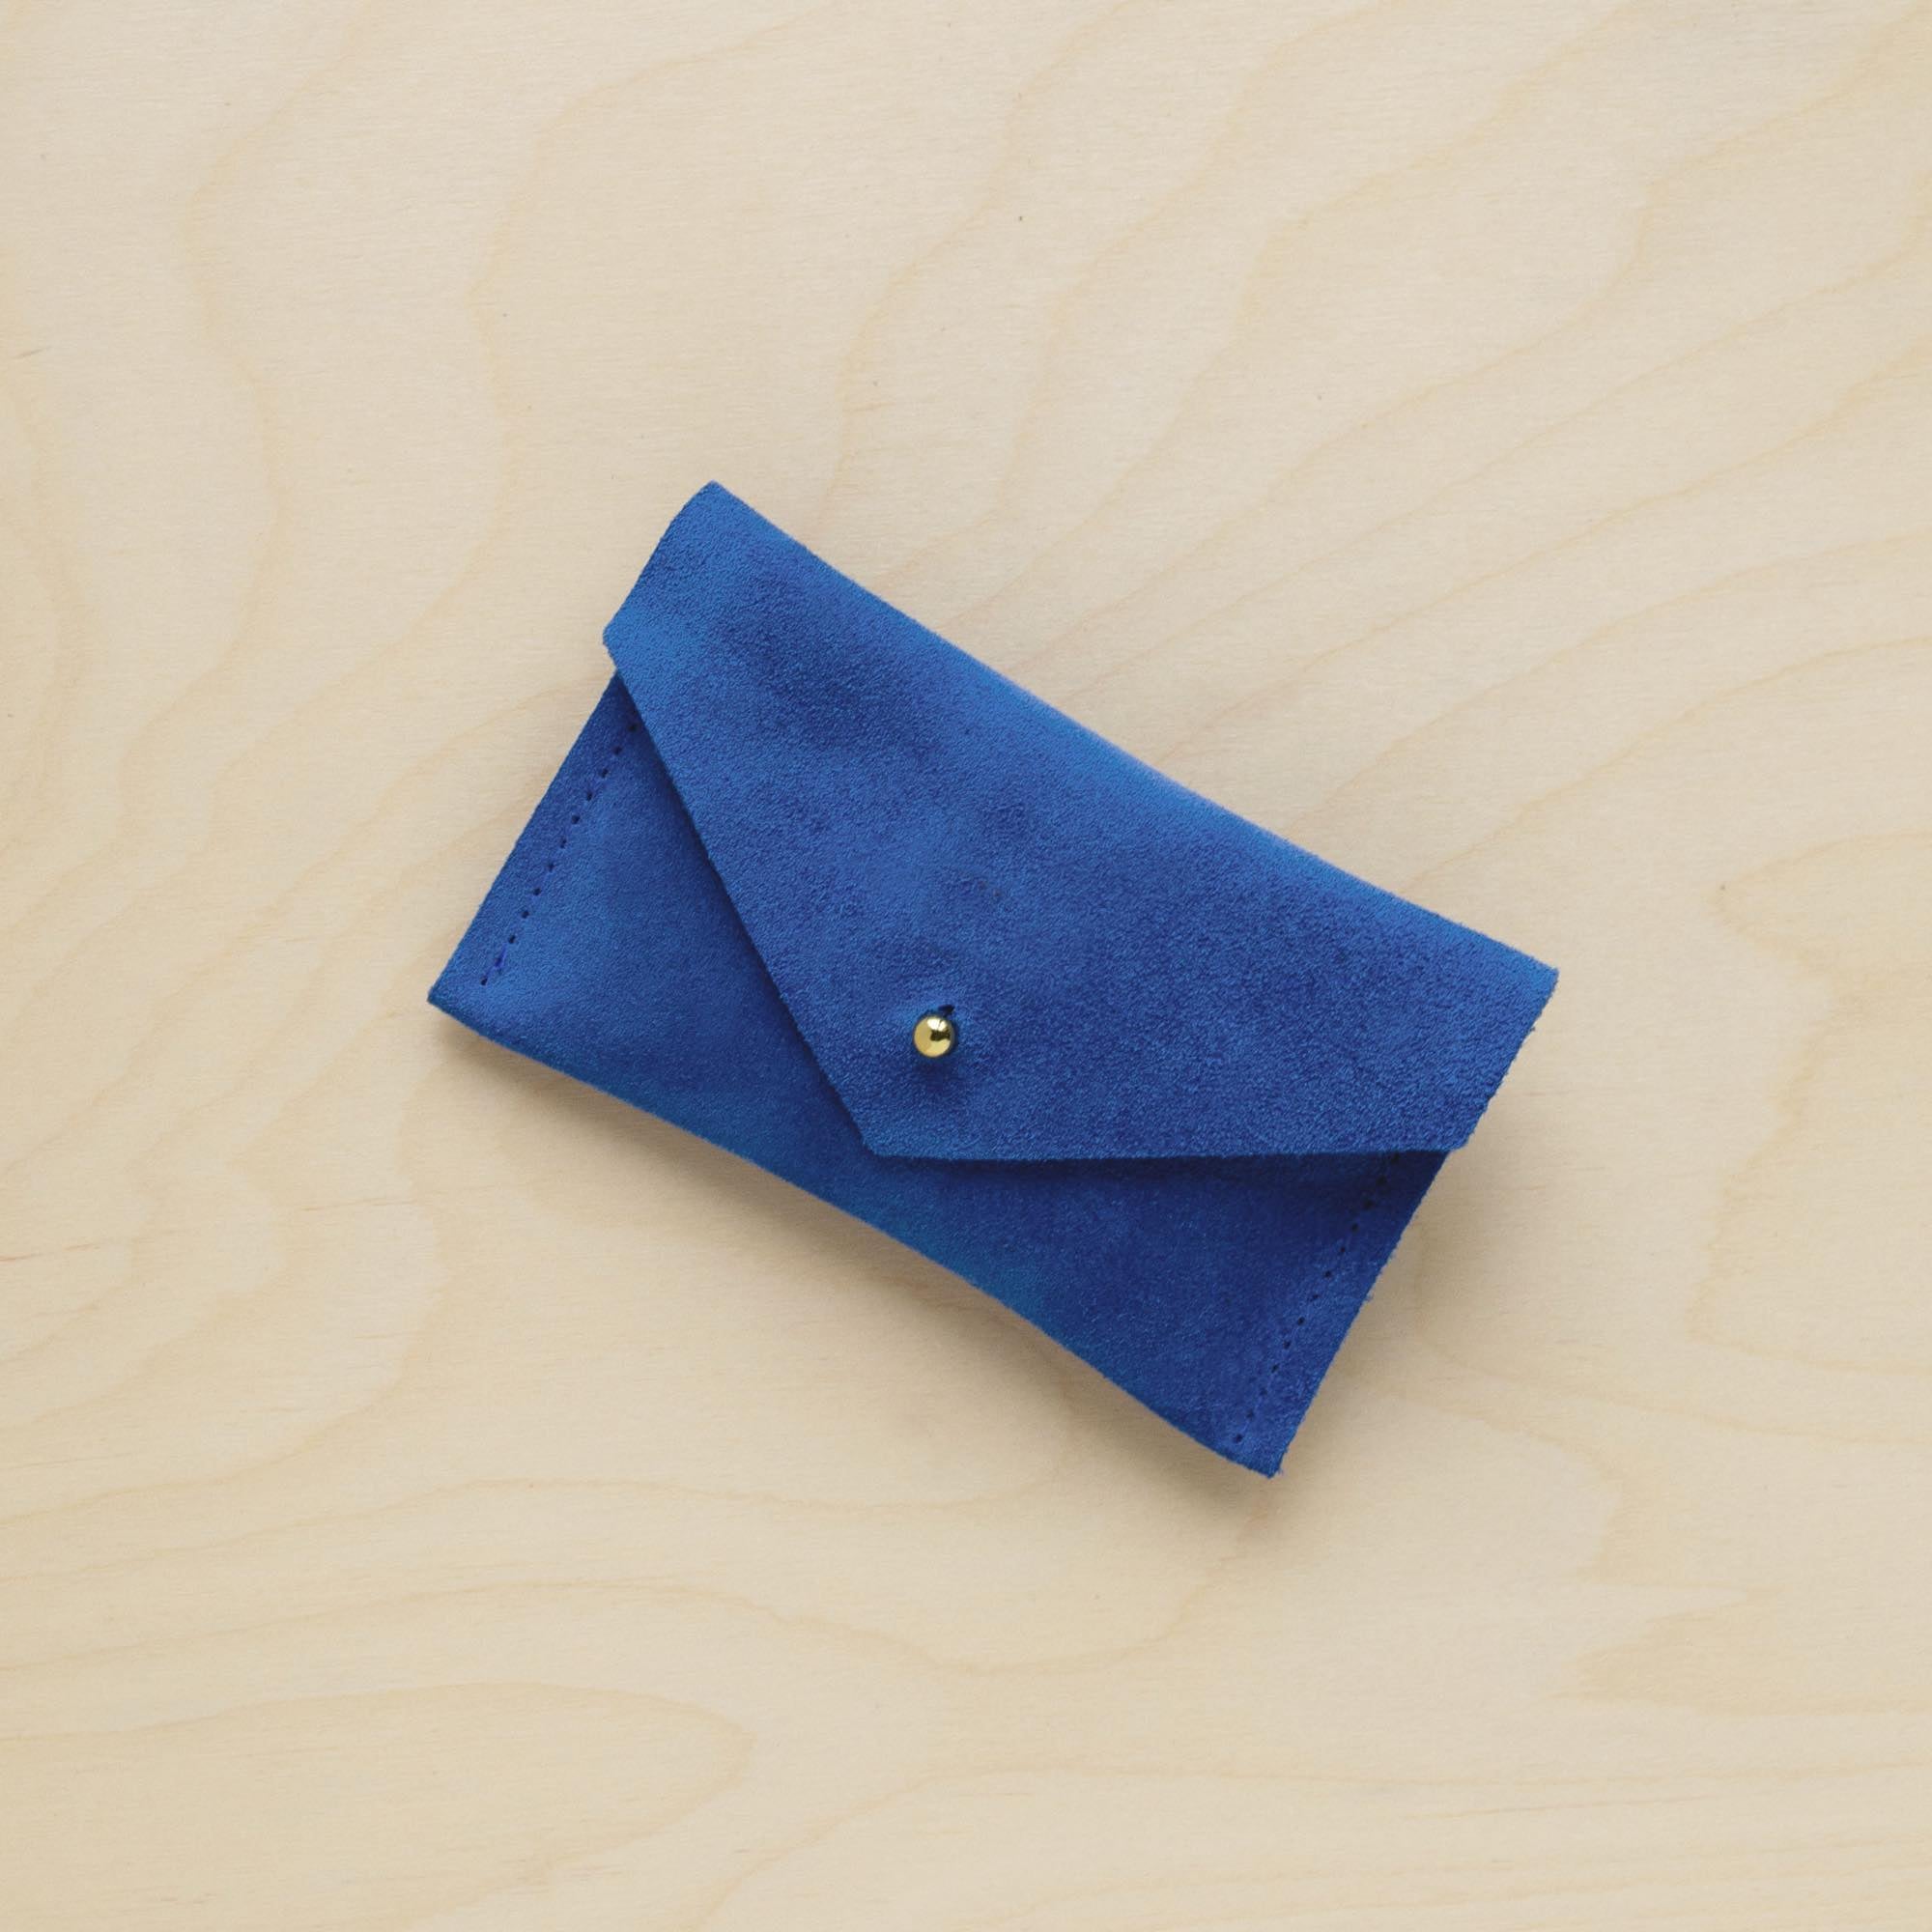 A suede Small Notions Pouch in Cobalt Blue. Complete with a stud for secure closing.